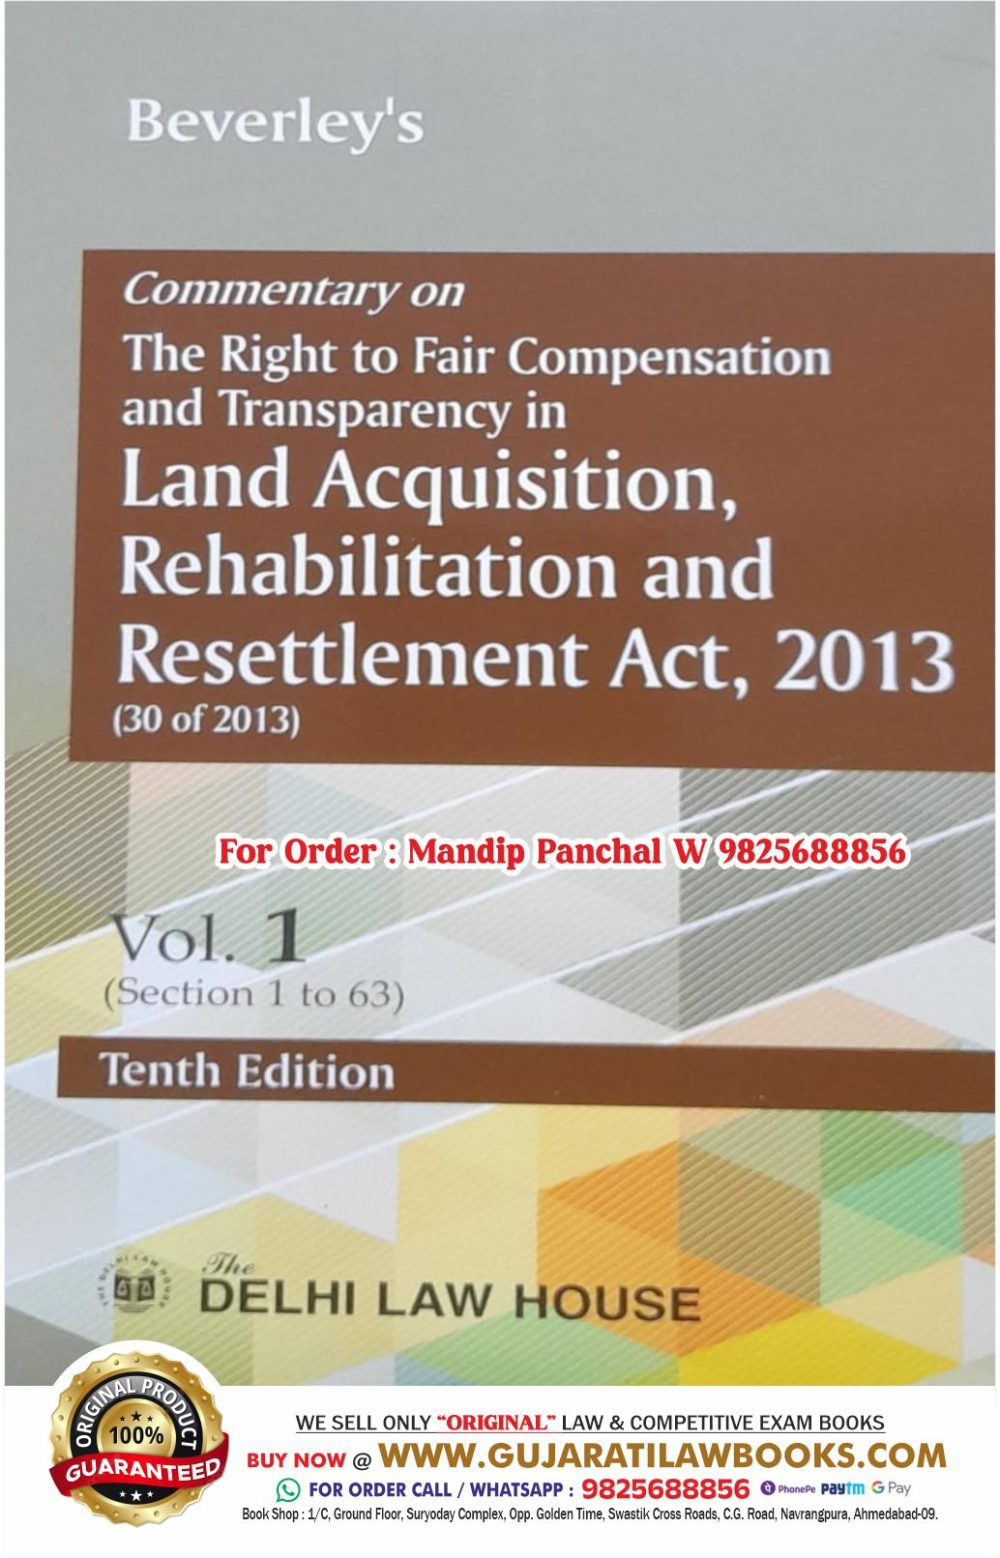 Beverley's Commentary on The Right to Fair Compensation and Transparency in Land Acquisition, Rehabilitation and Resettlement Act, 2013 - (In 2 Volumes) Latest 2024 Edition DLH